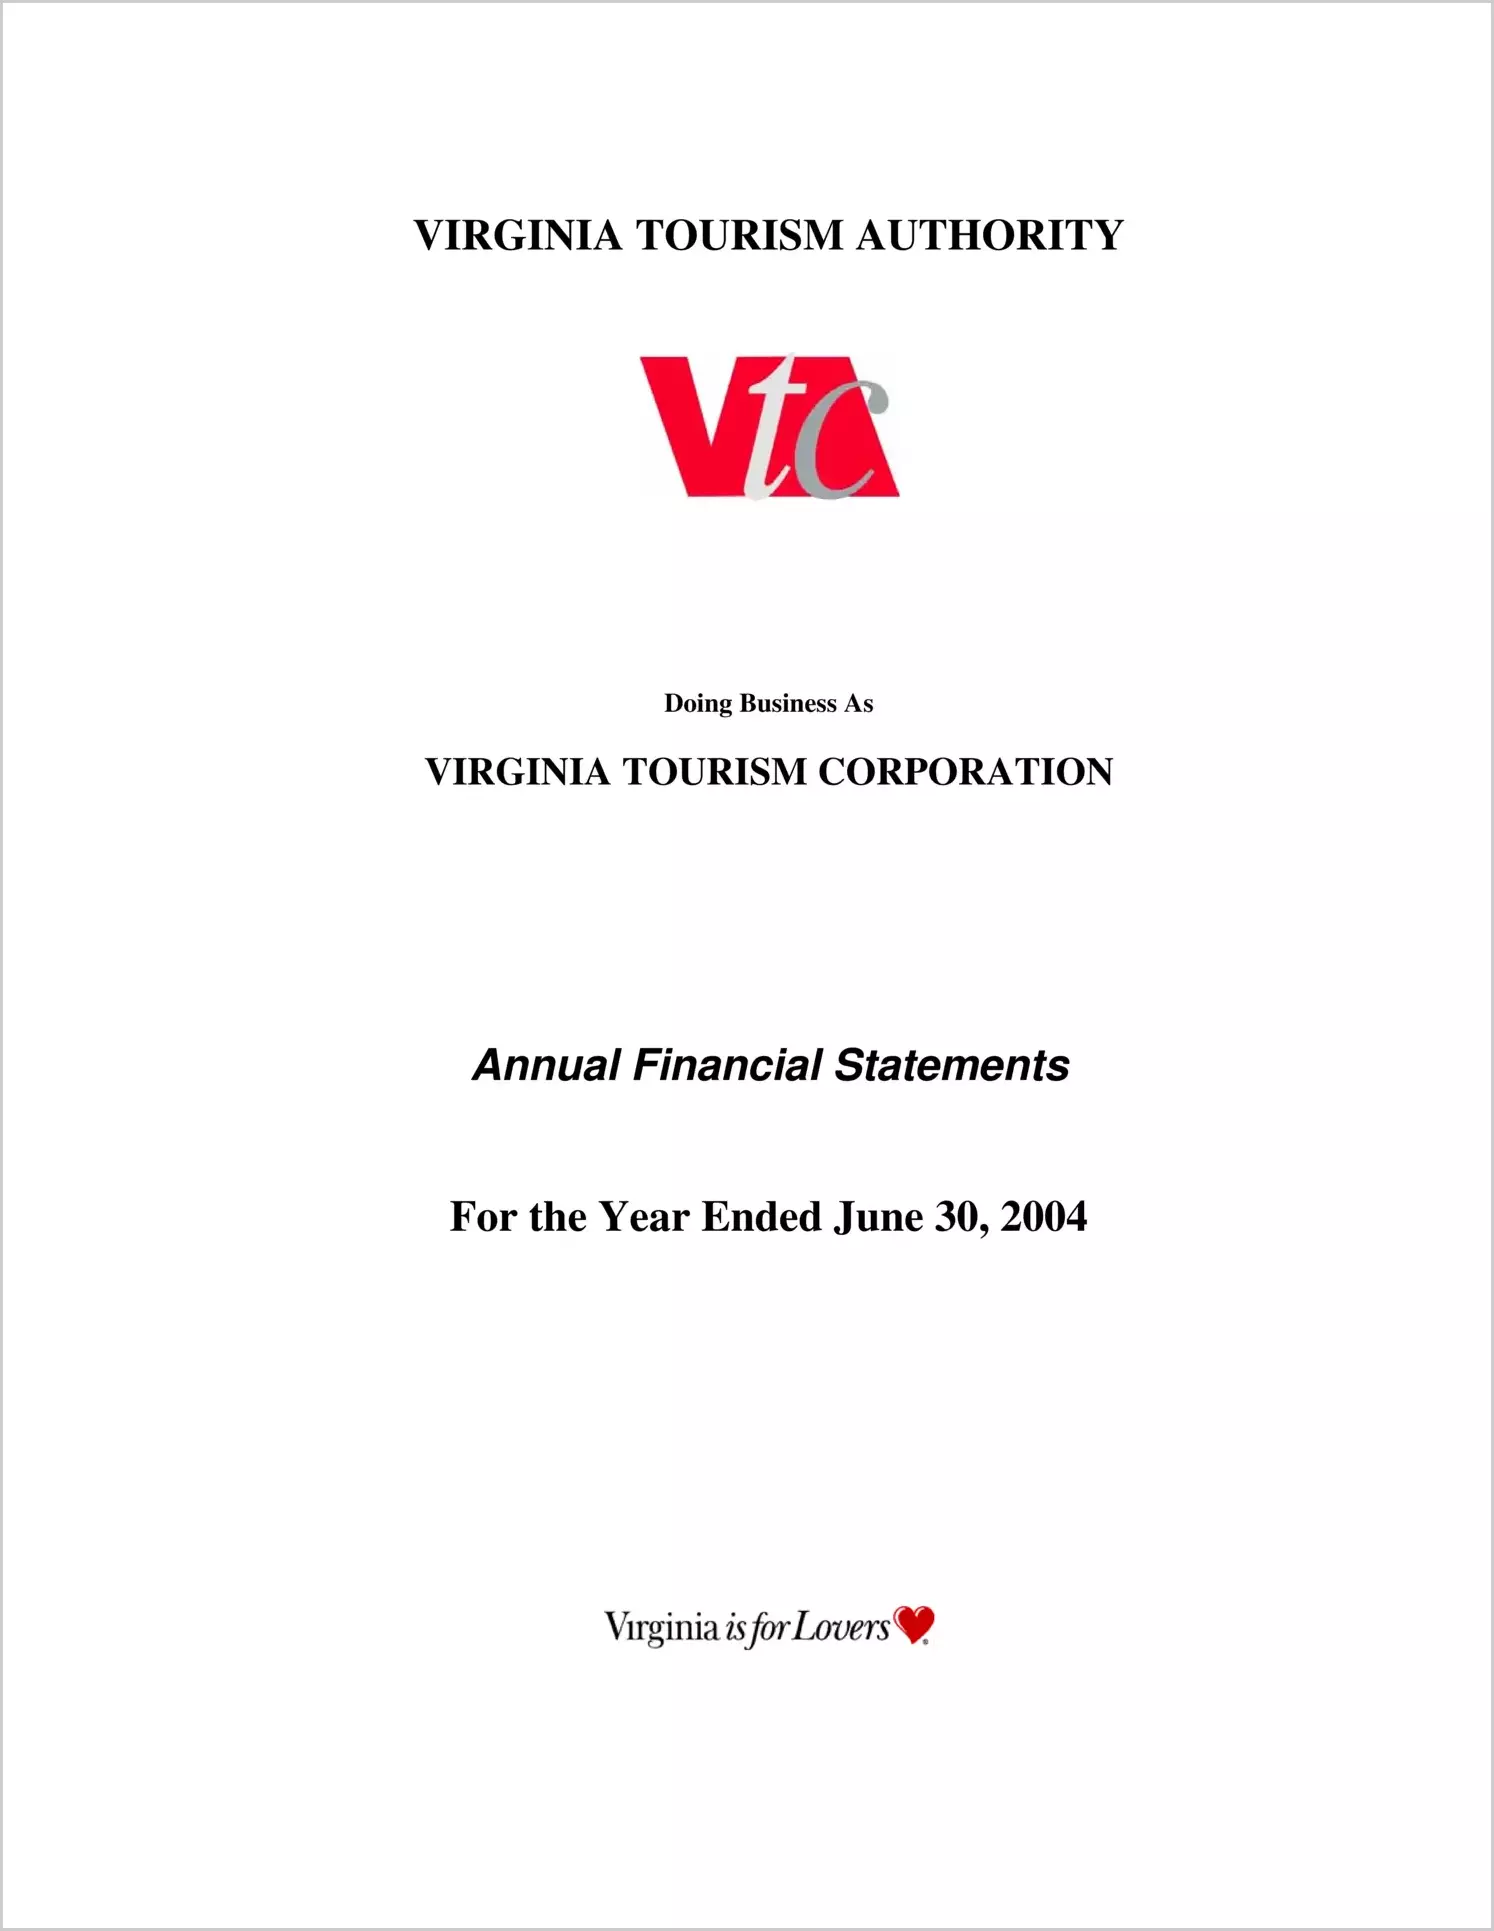 Virginia Tourism Authority for the year ended June 30, 2004